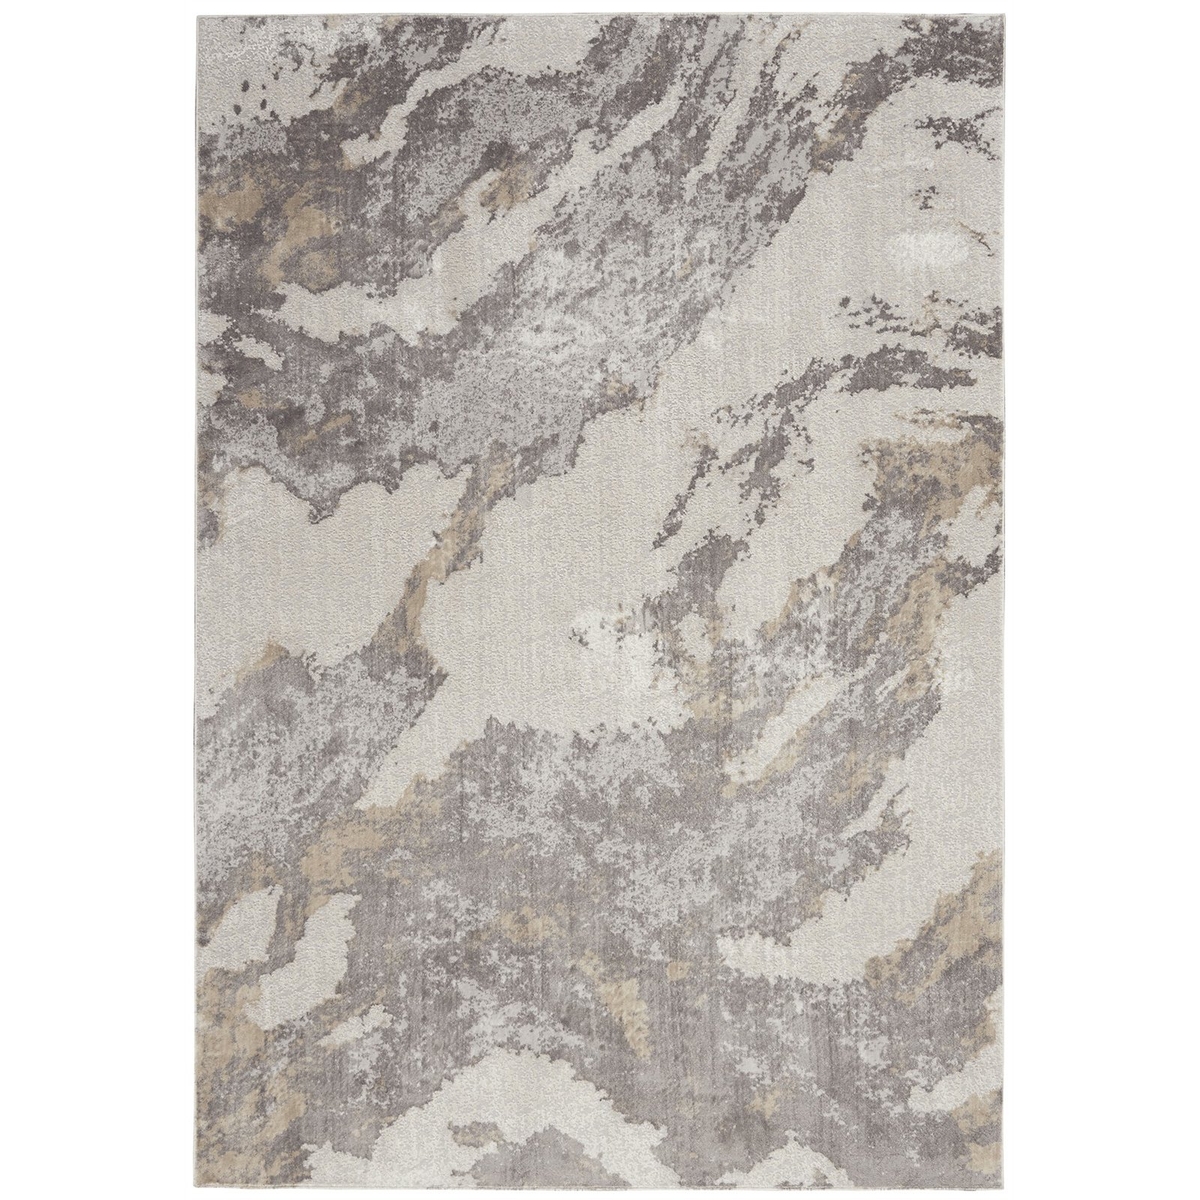 Silky Textures Rug, Brown & Ivory